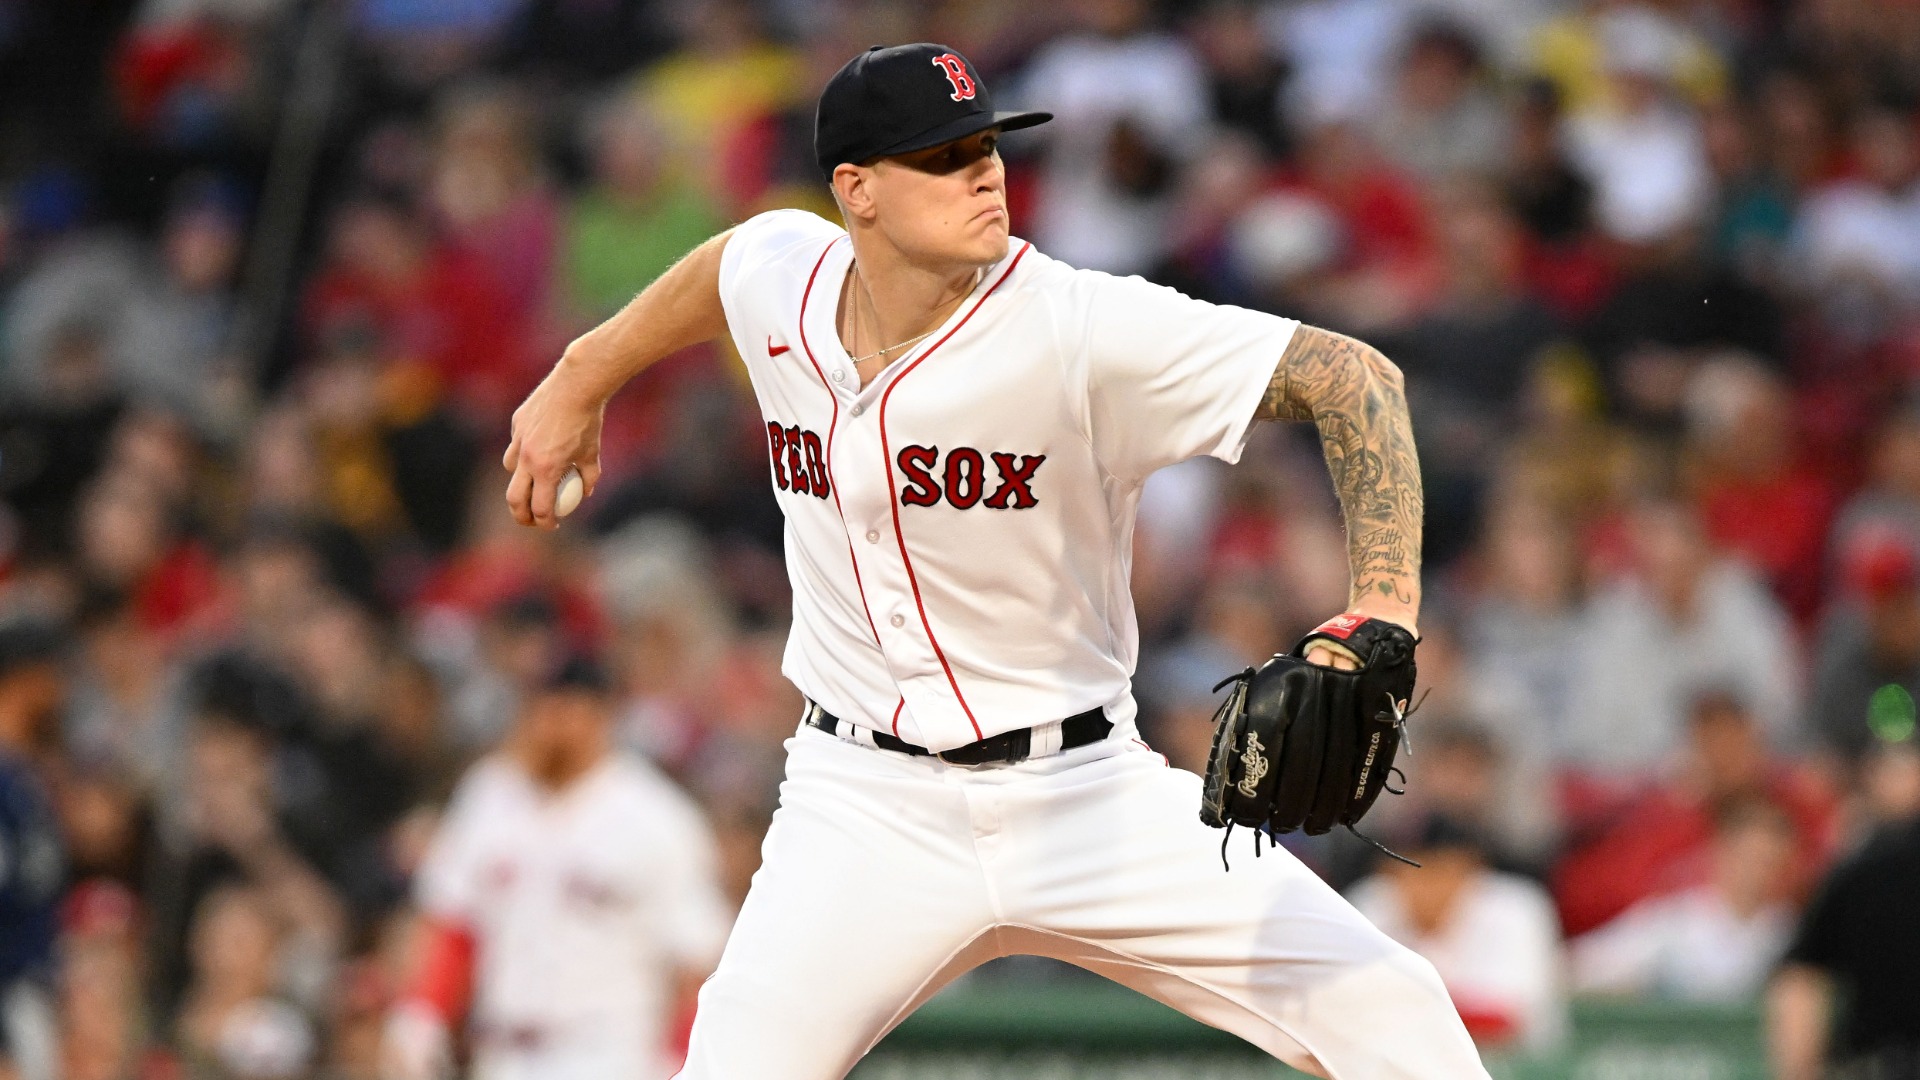 Red Sox Vs. Rays Lineups: Tanner Houck Seeks Bounce-Back Outing For
Boston